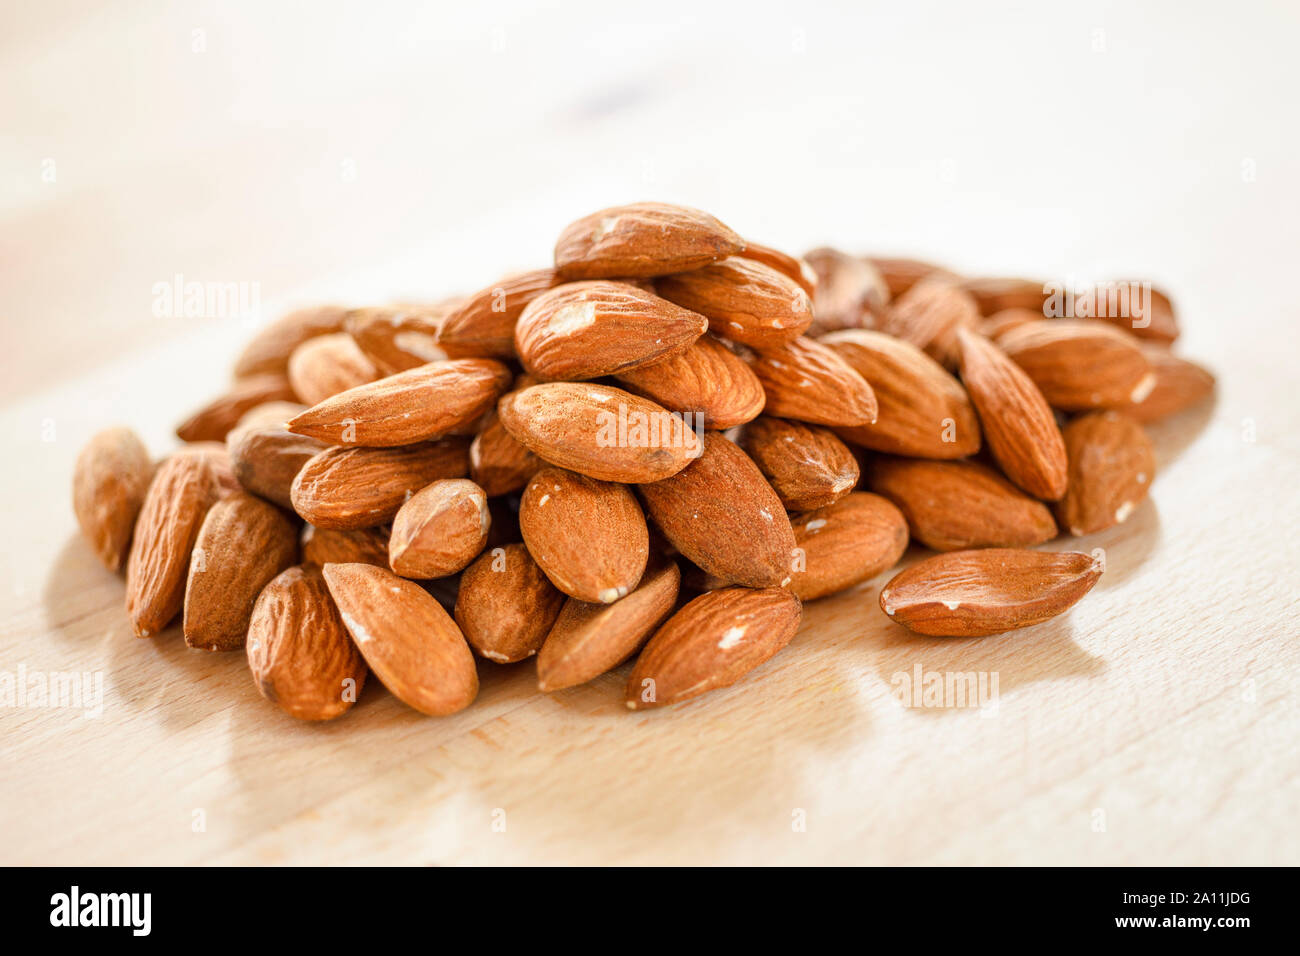 Pile of almonds nuts Stock Photo